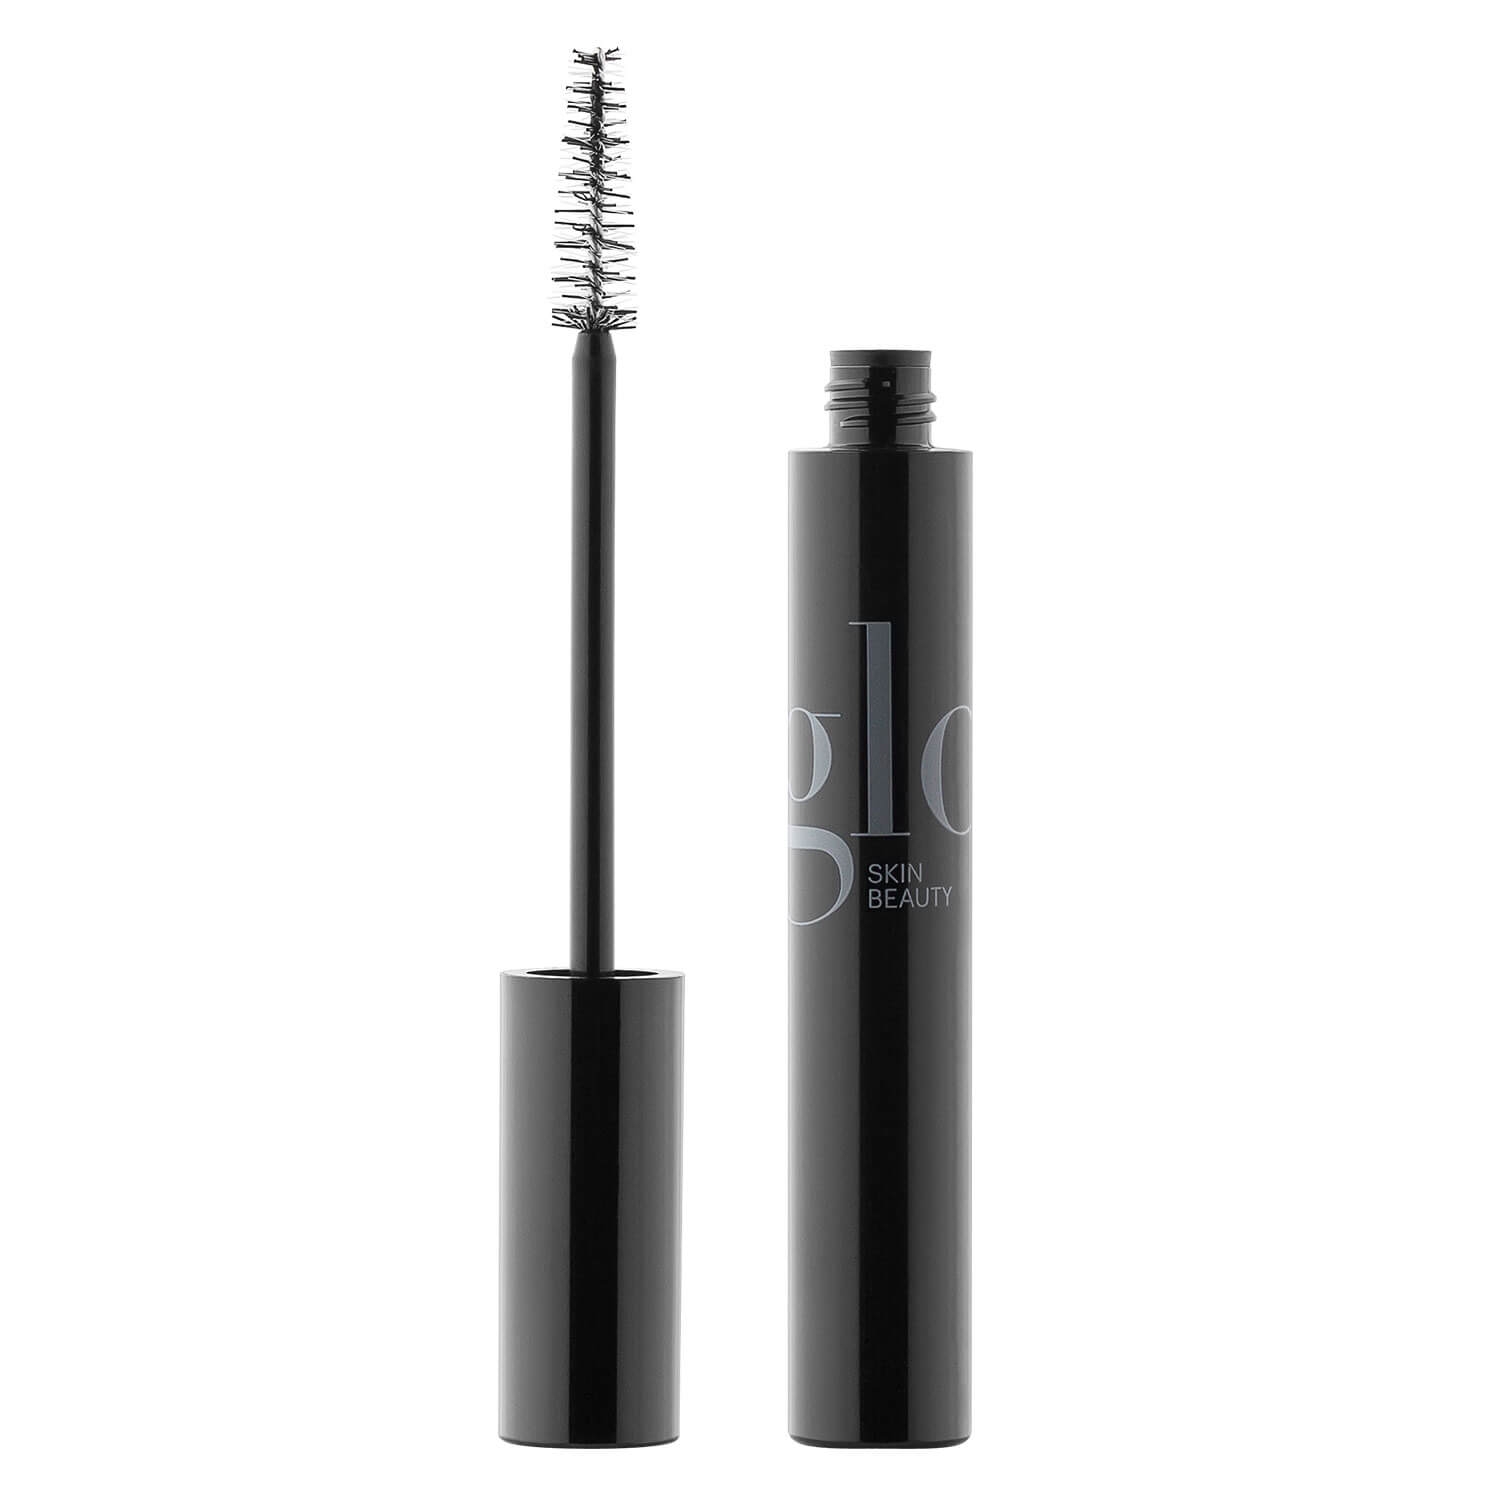 Product image from Glo Skin Beauty Mascara - Water Resistant Mascara Black